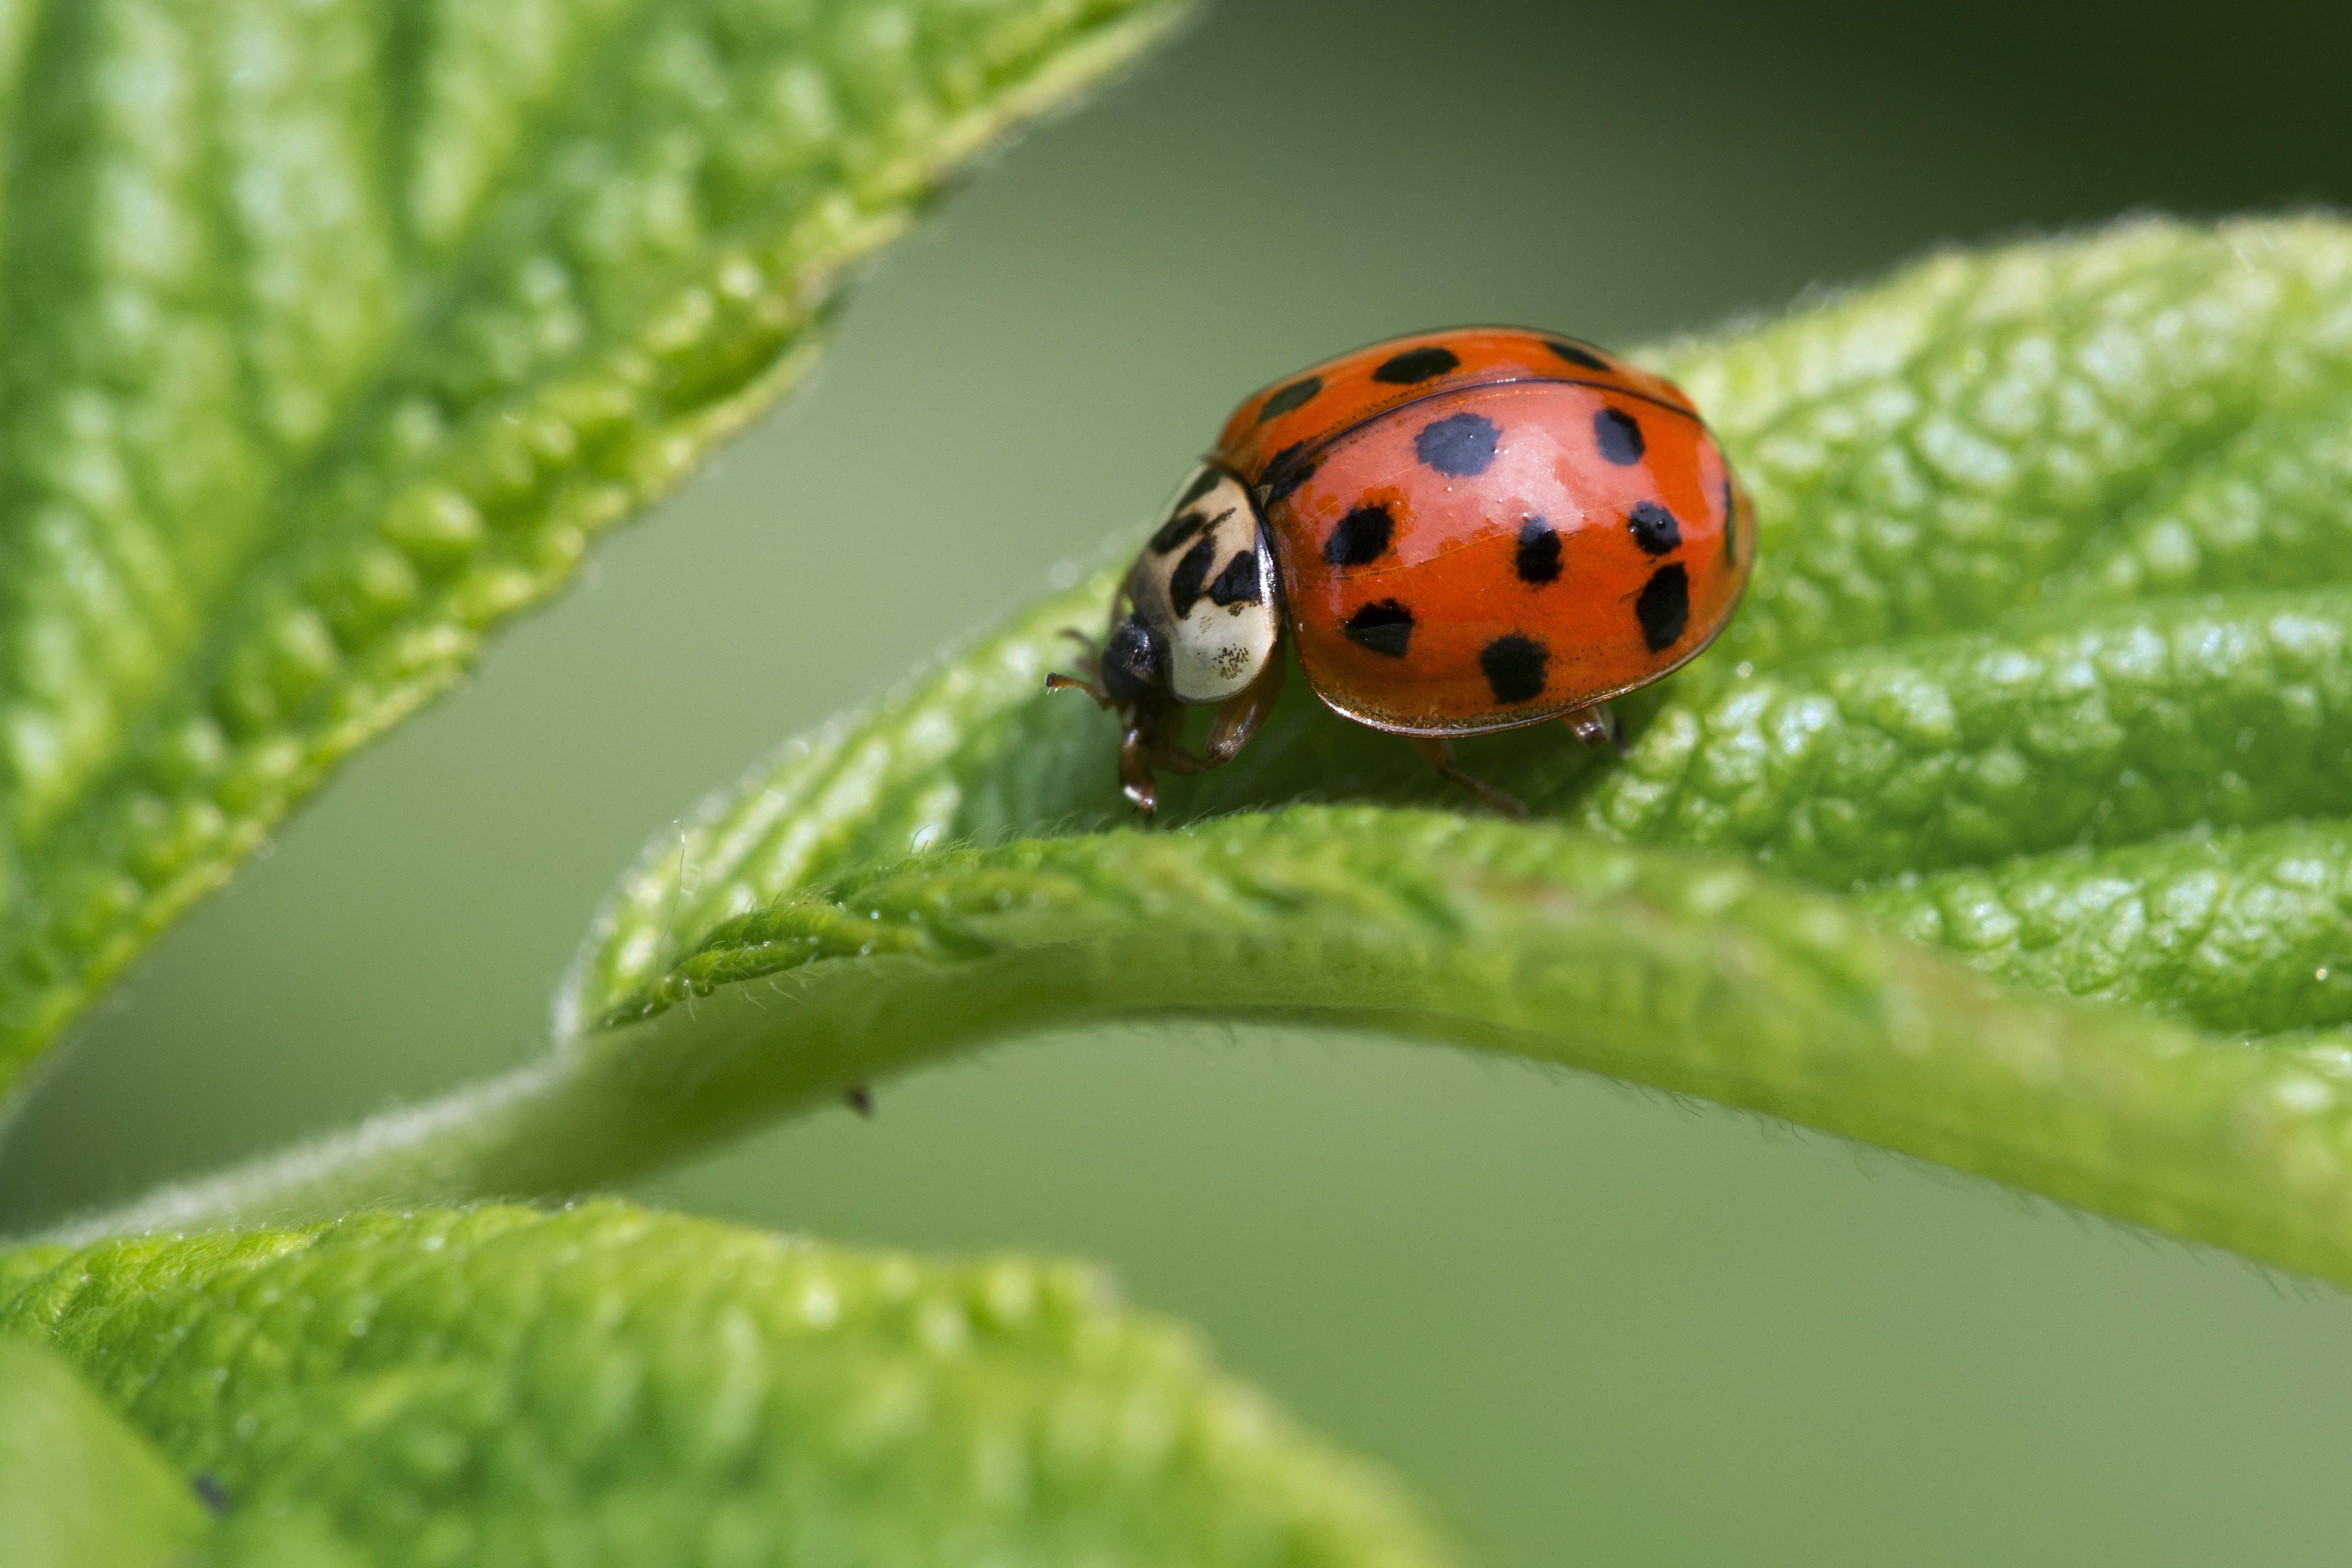 How to Get Rid of Ladybugs - How to Control Asian Lady Beetles